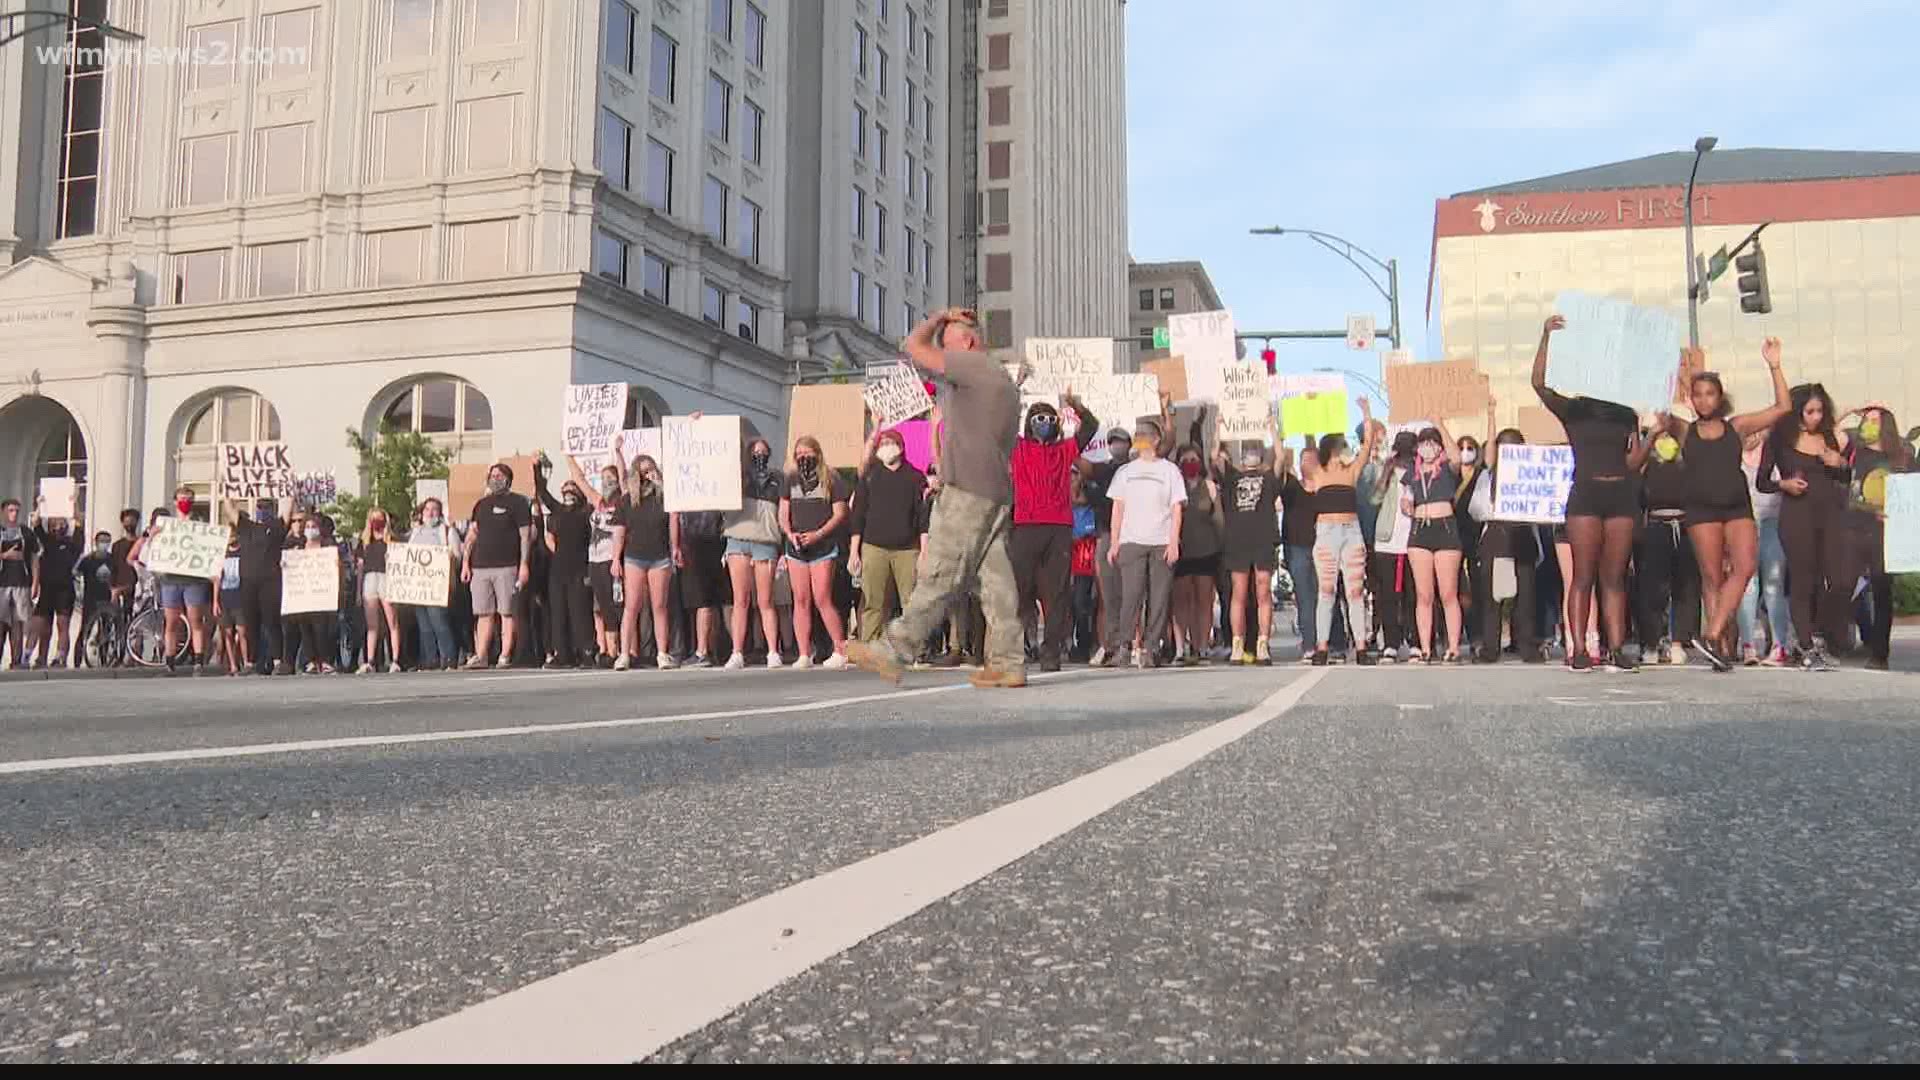 Despite a city-wide curfew, protesters showed up in downtown Greensboro to voice their opinion on police brutality.